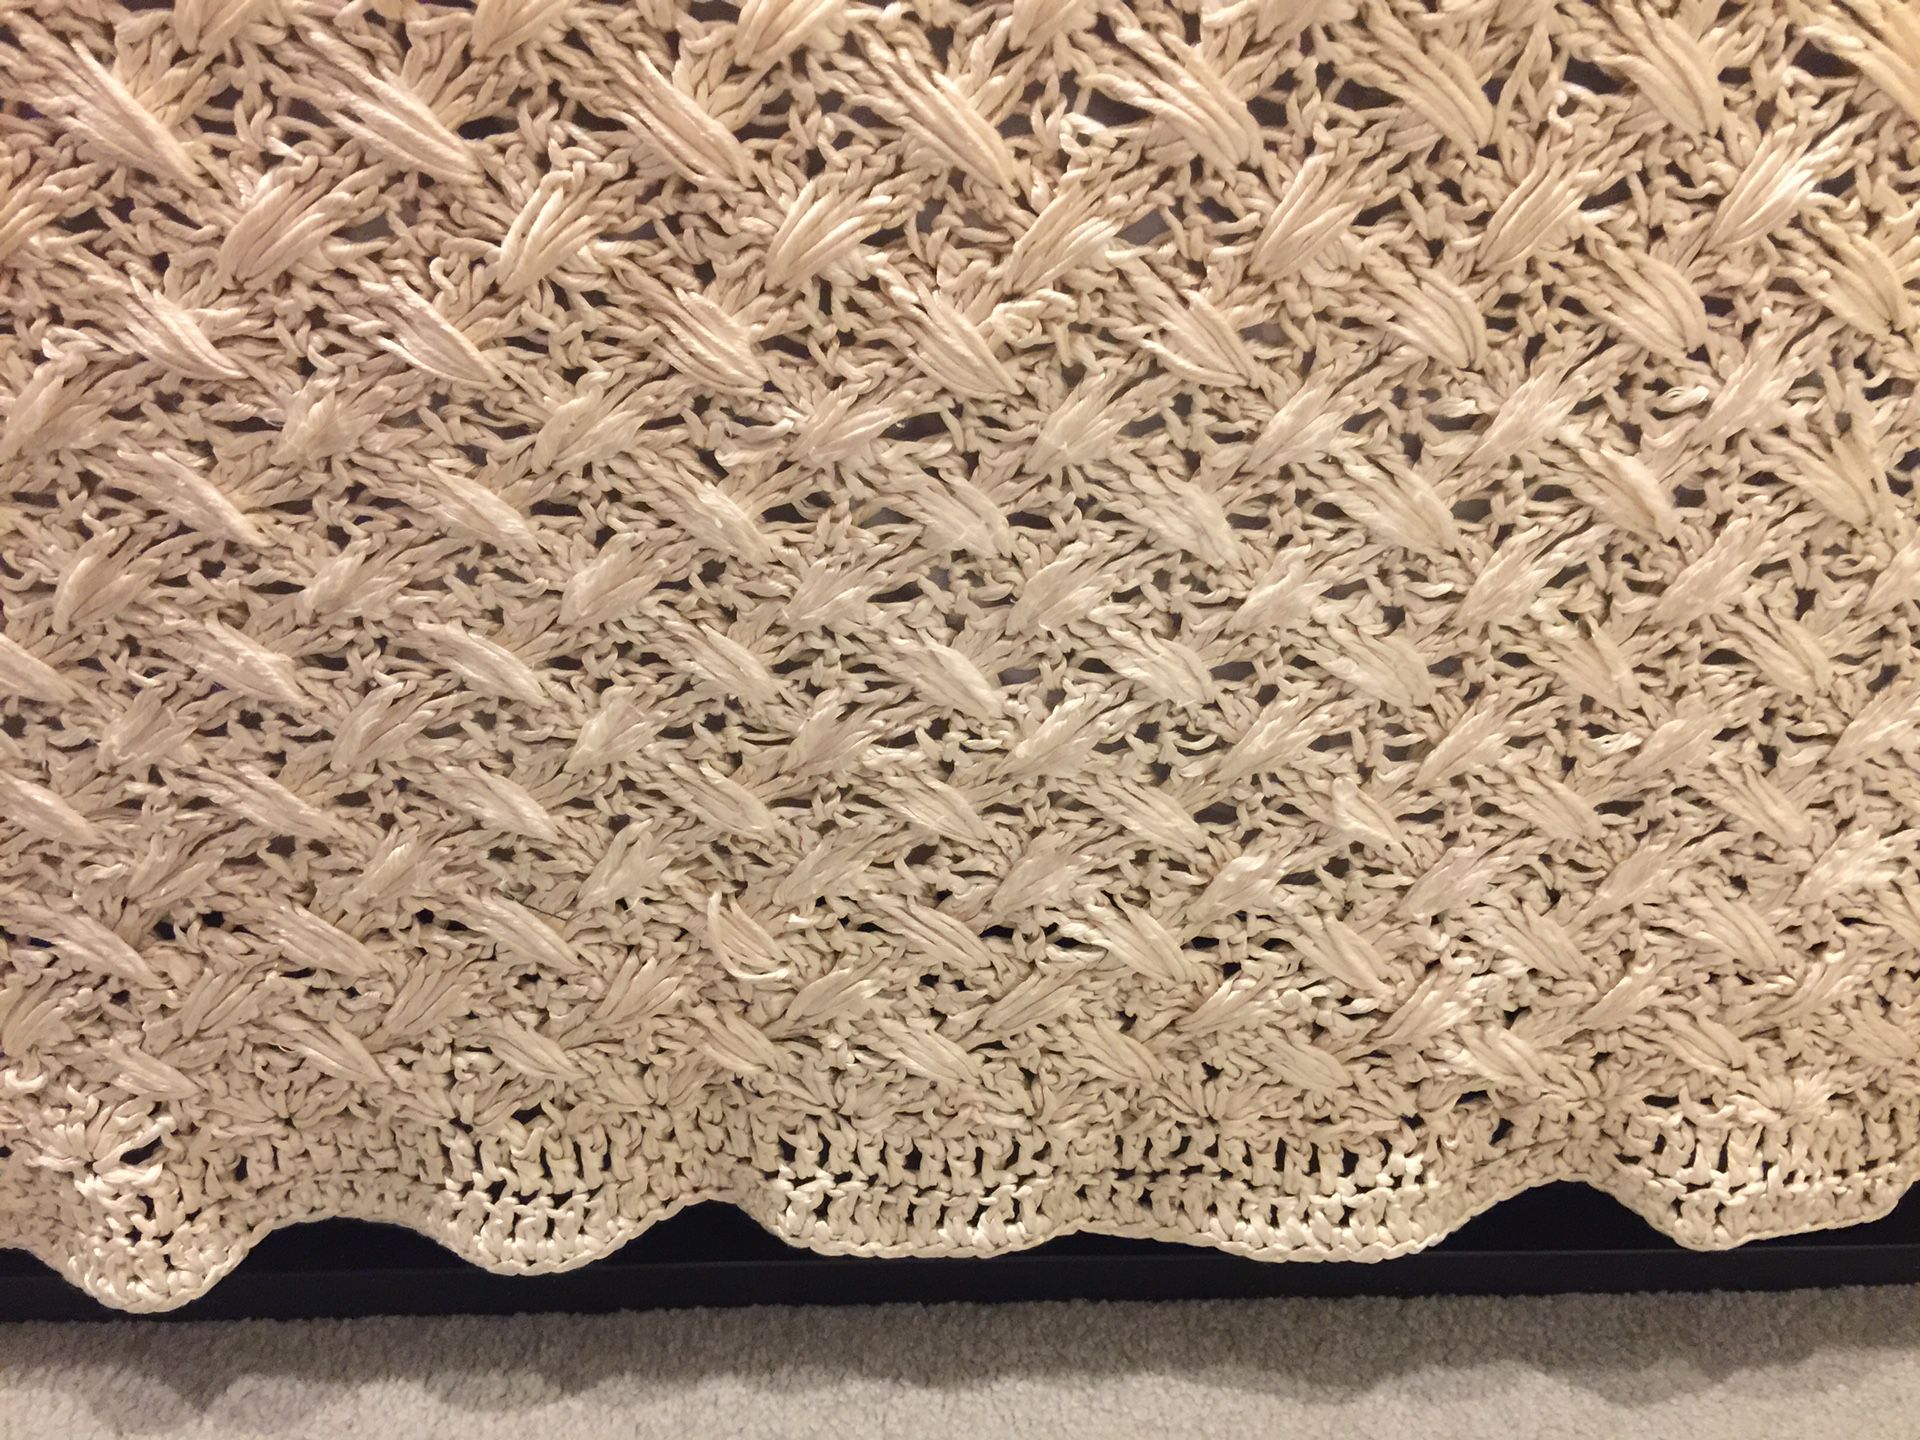 Hand Crocheted silky thread bed covering.